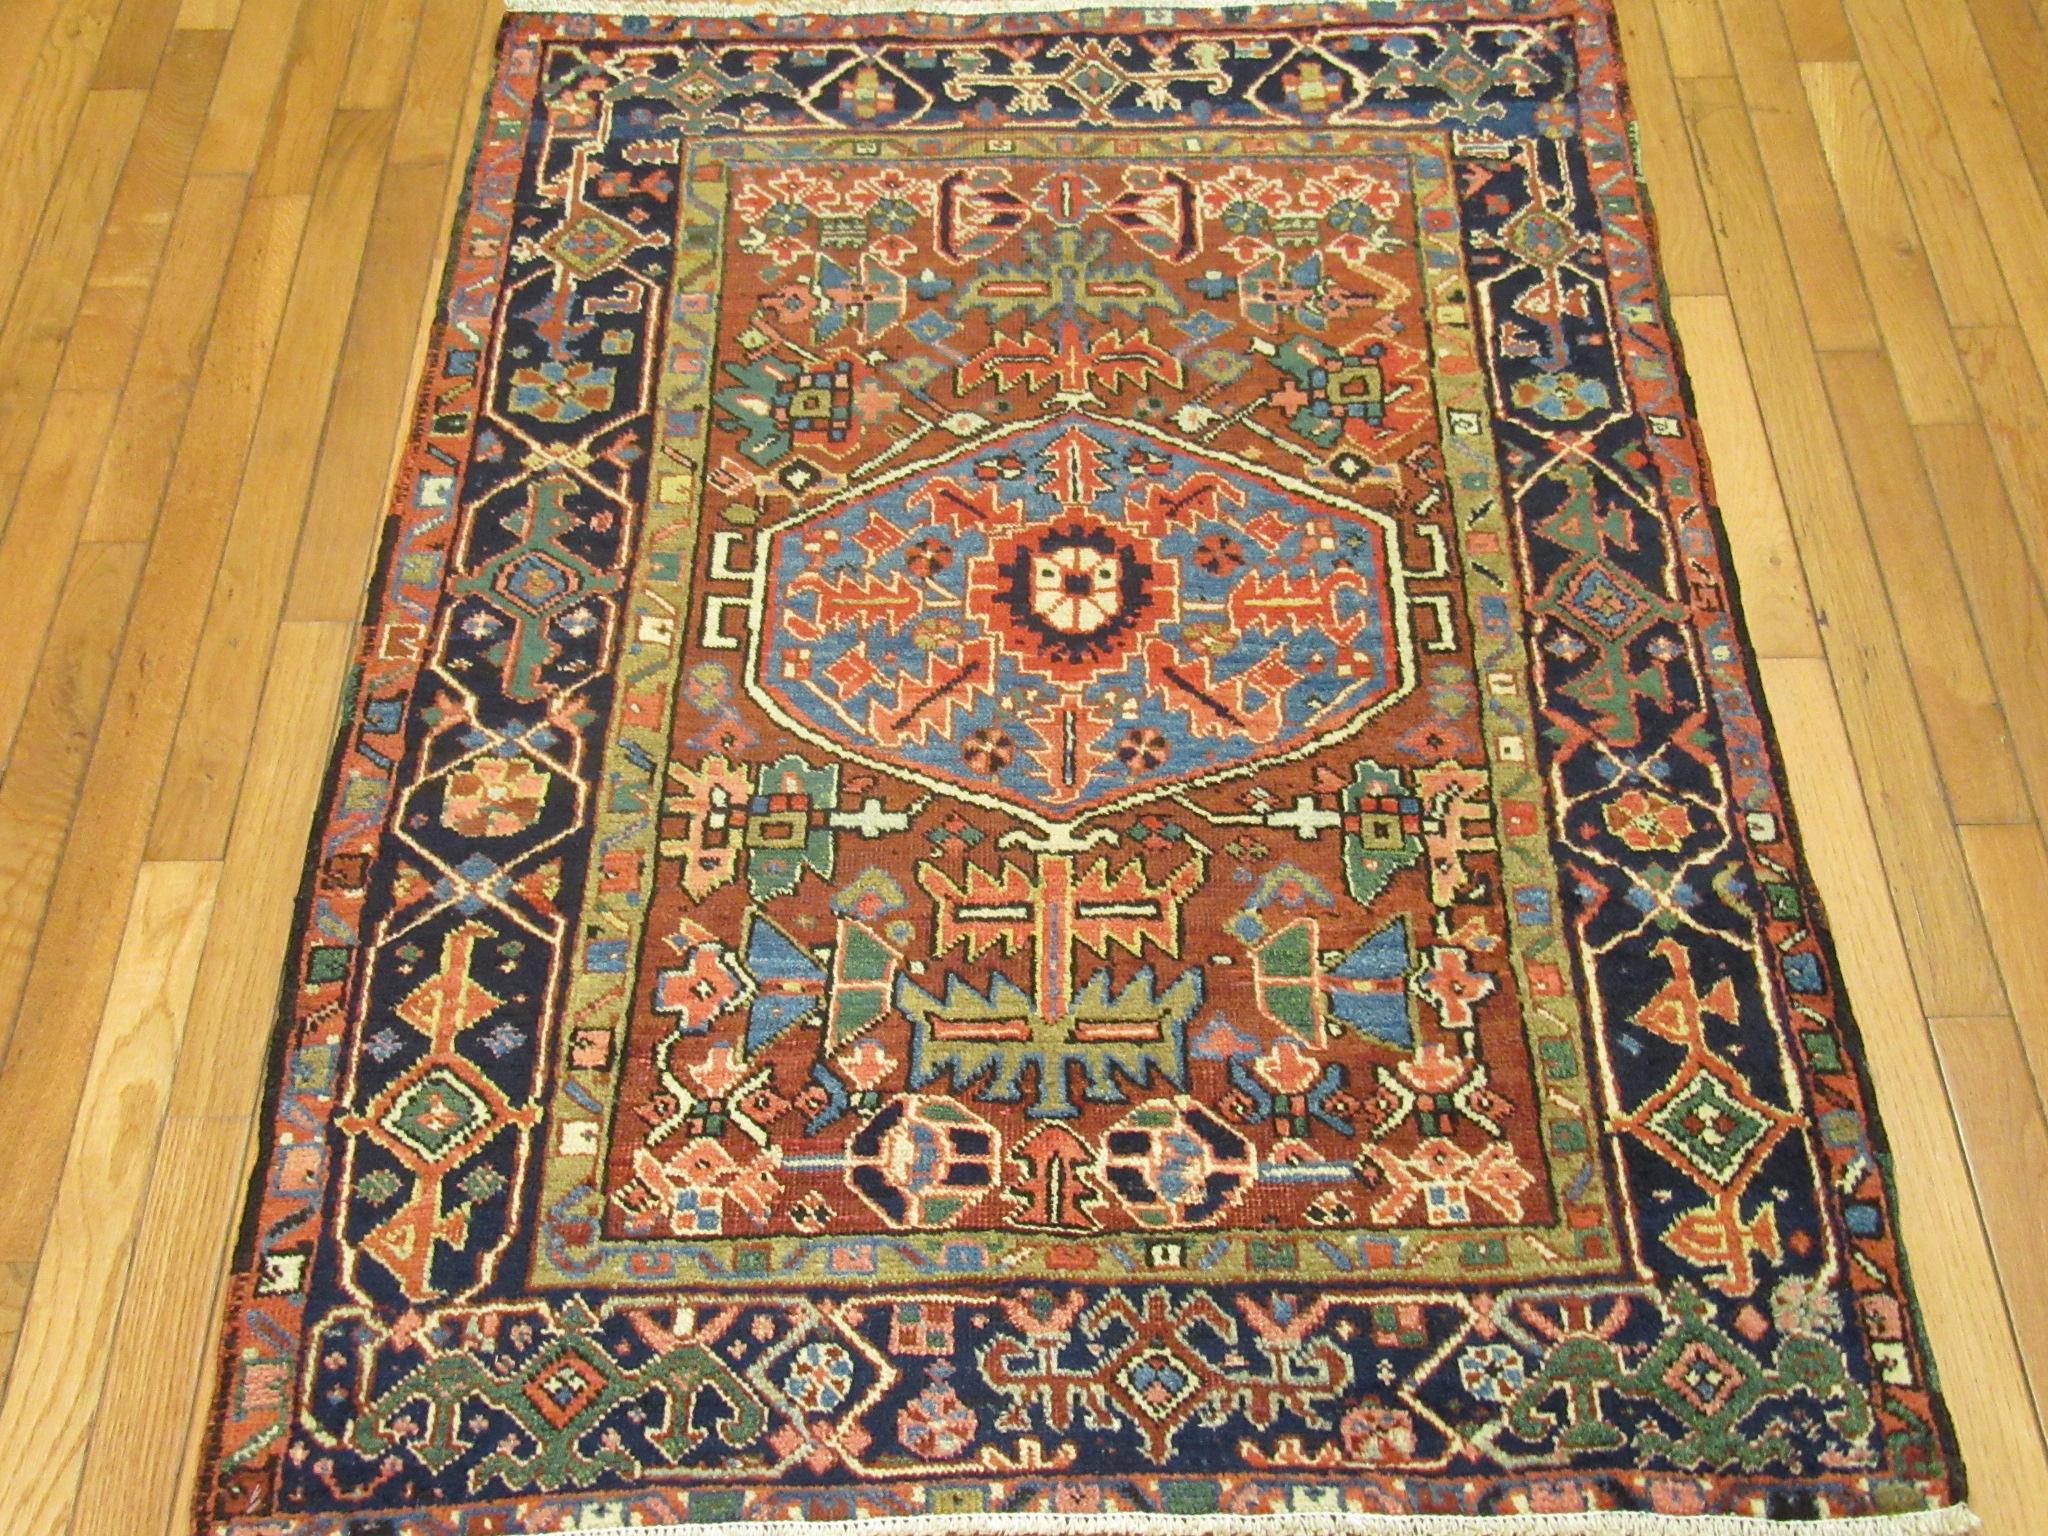 This a small antique hand-knotted Persian rug in the Heriz style design. It is made with wool colored with natural dyes on a cotton foundation. The rug measures 3' 5'' x 4' 5'' an easy size for placement in any room at home or office.